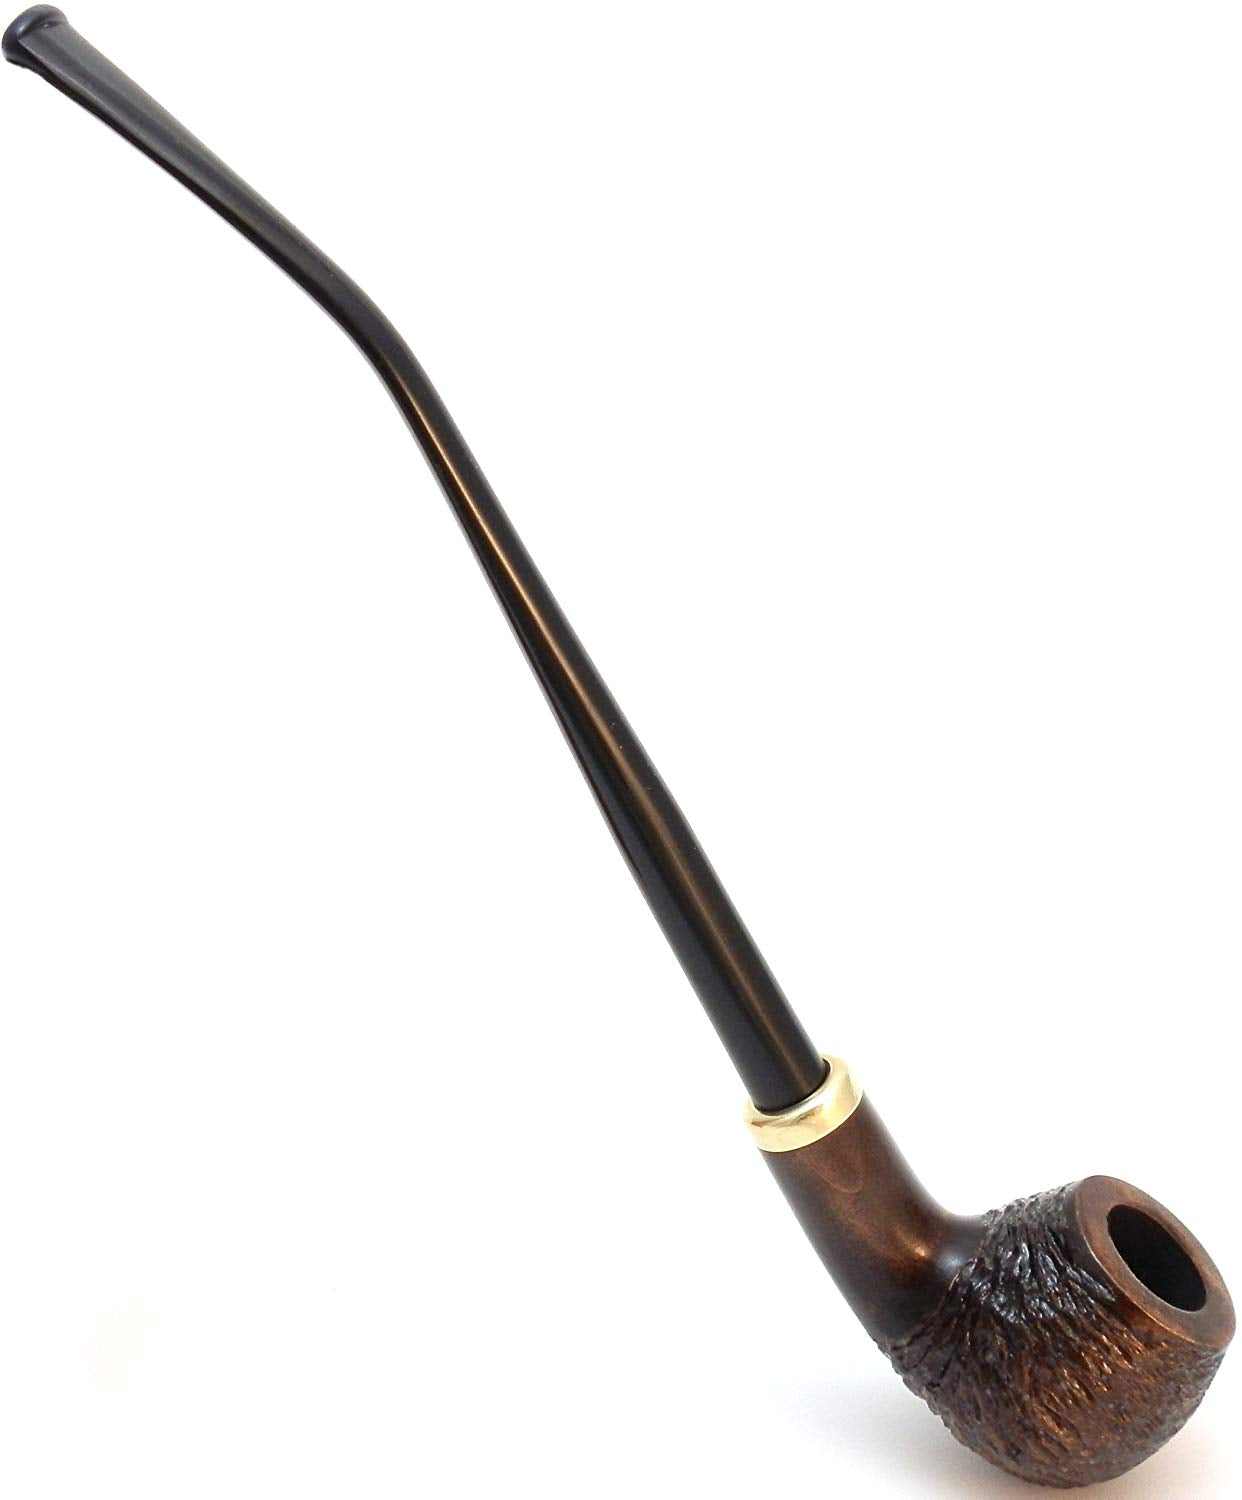 No. 14 Churchwarden Pear Wood Smoking Pipe for Sale